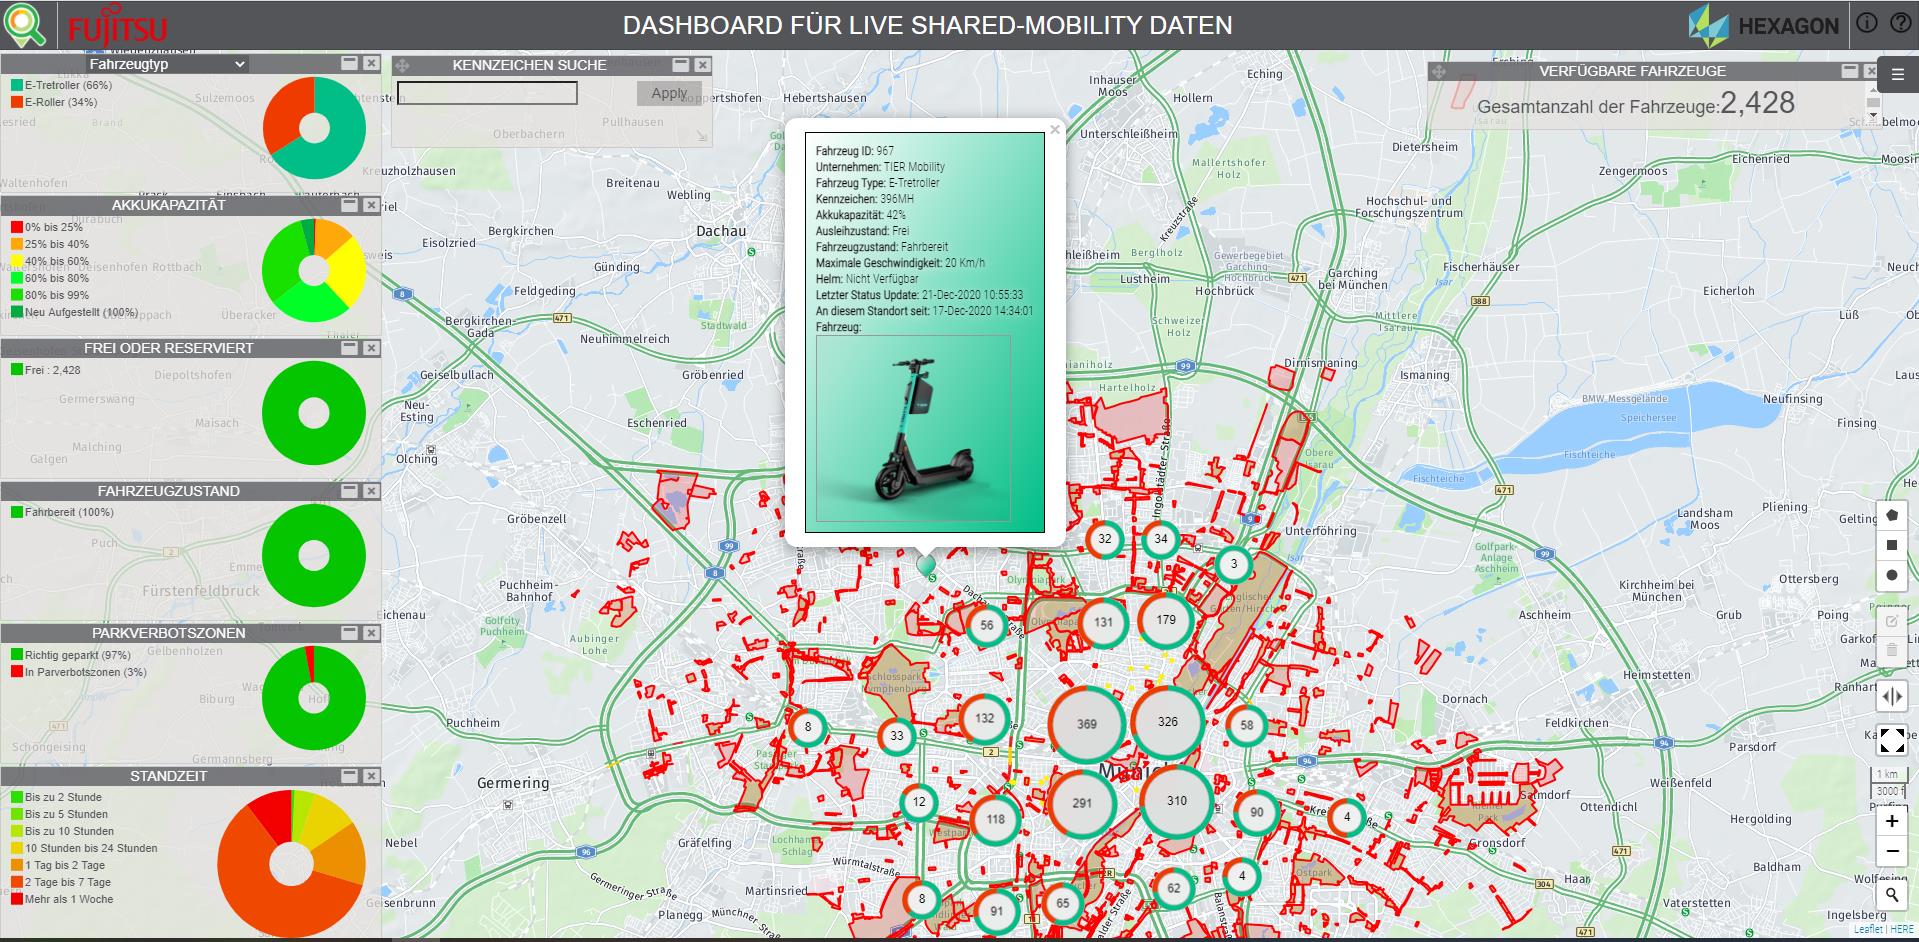 Smart-Monitoring-Ecosystem: Live Shared-Mobility Daten